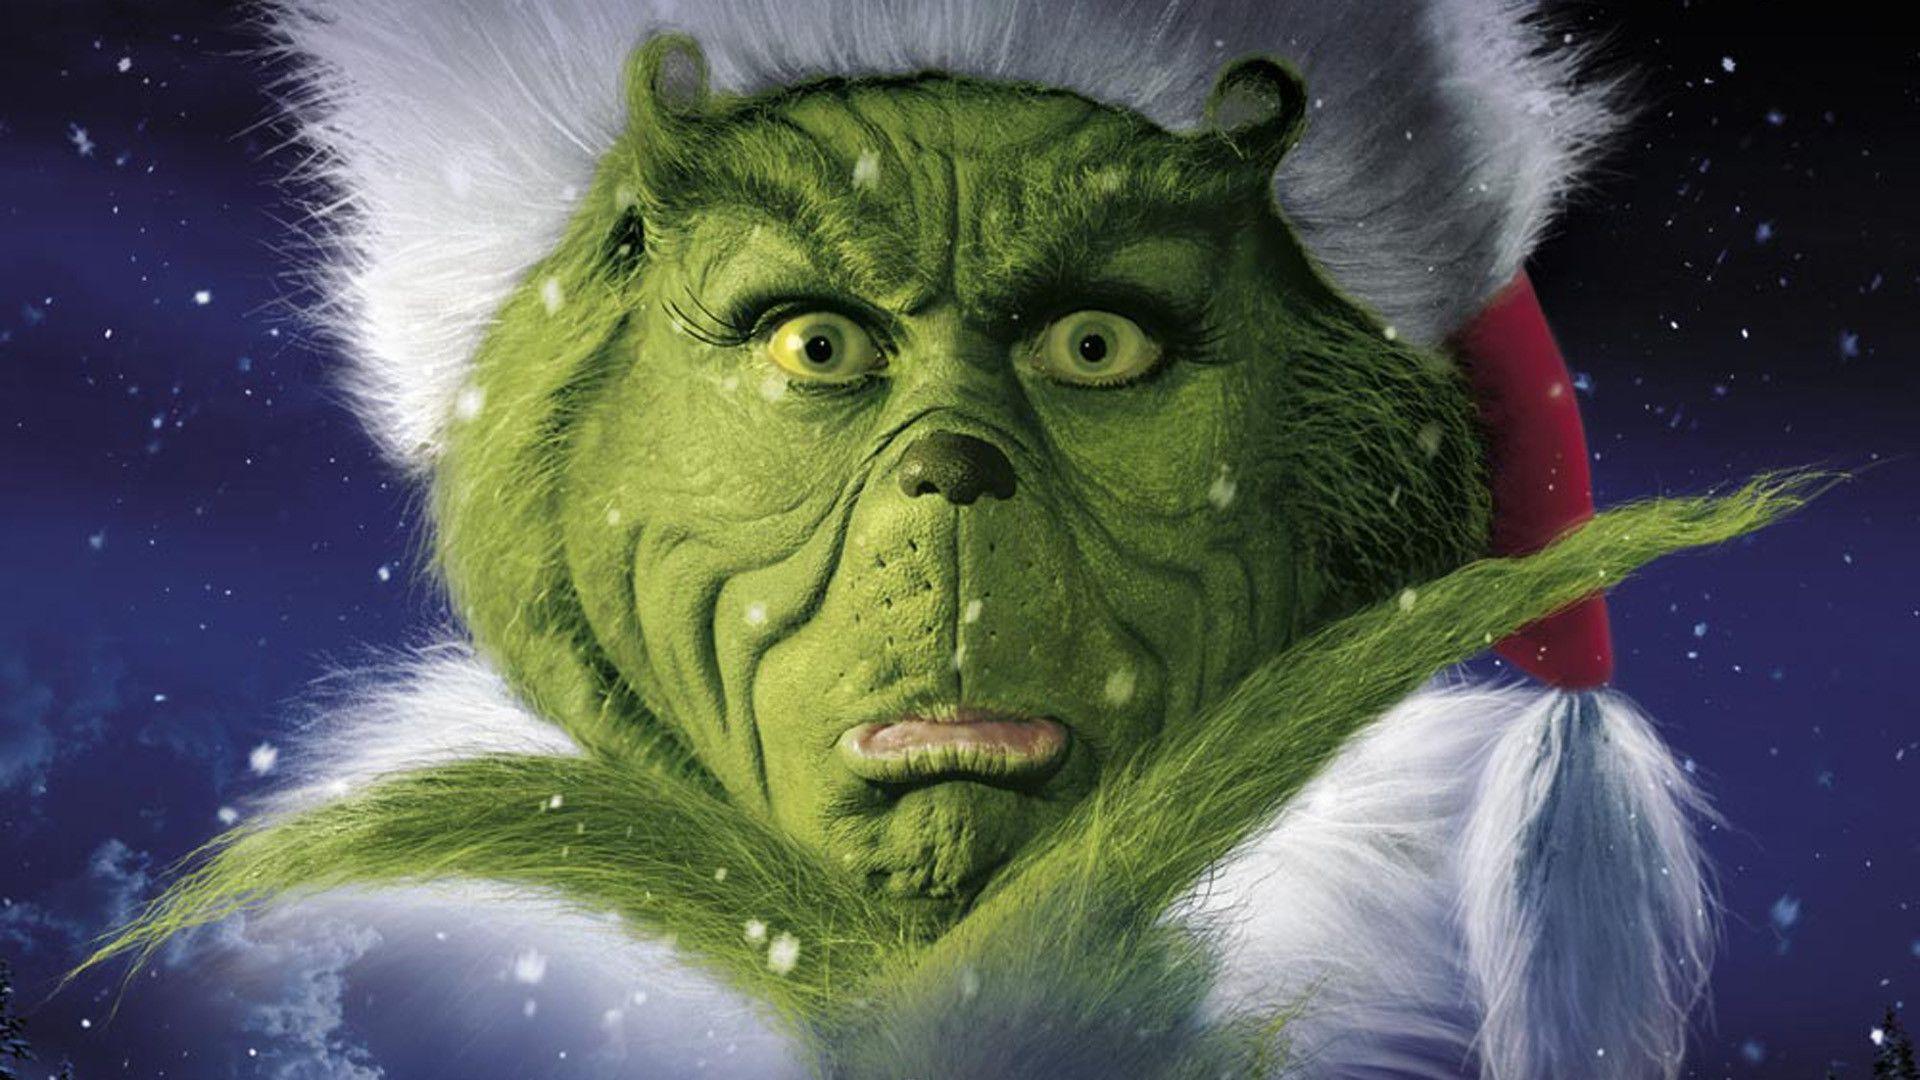 the grinch wallpaper